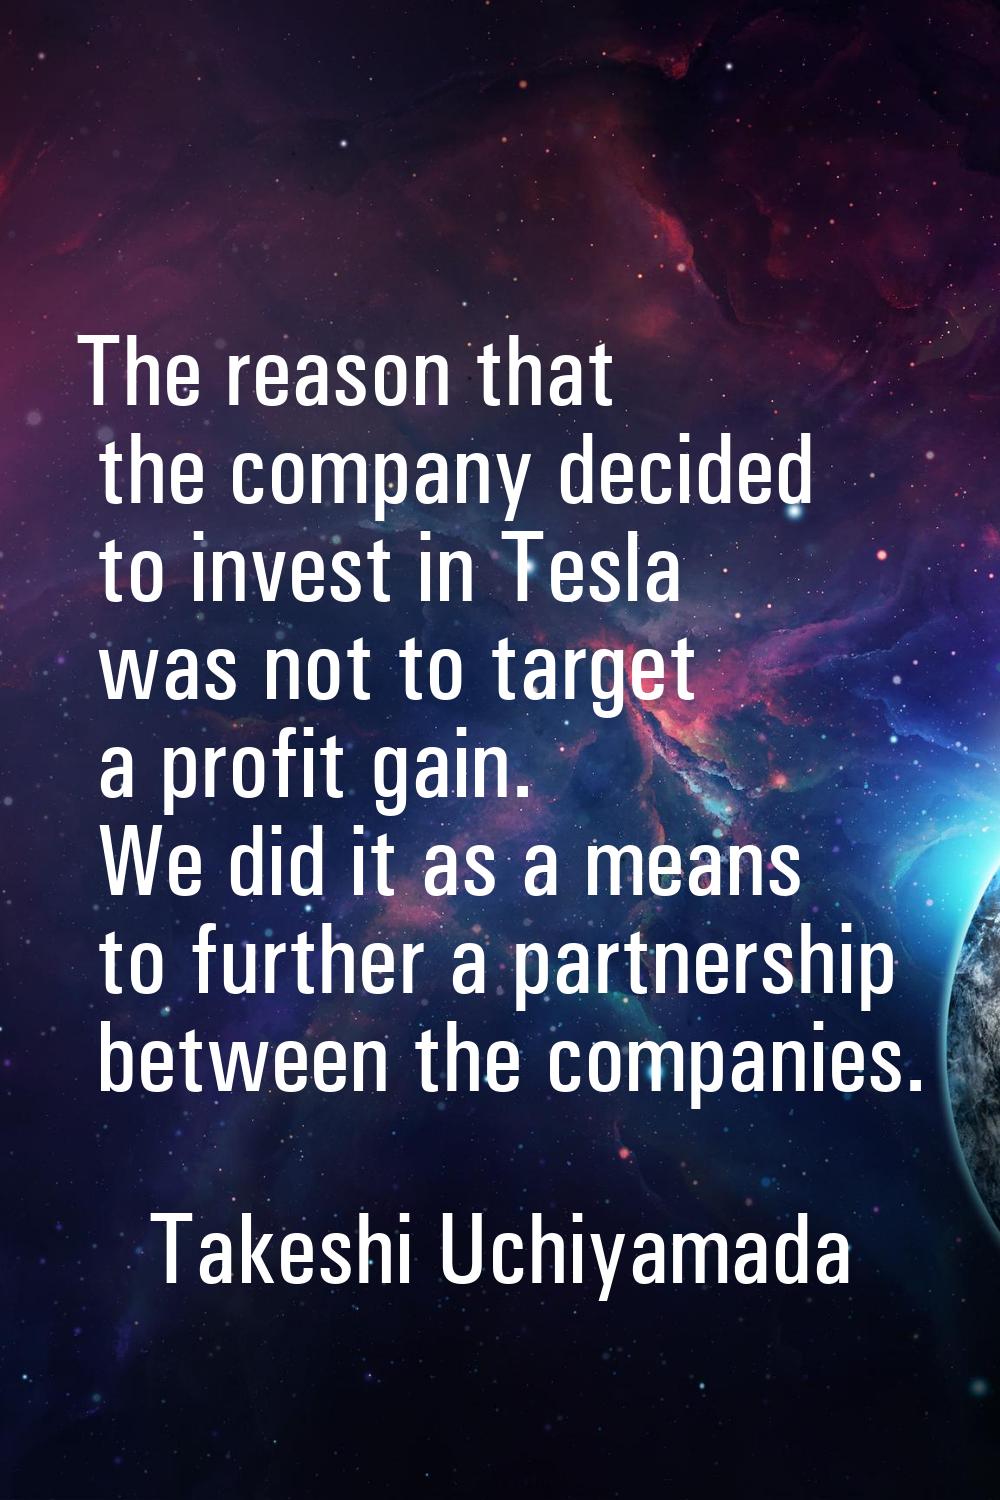 The reason that the company decided to invest in Tesla was not to target a profit gain. We did it a